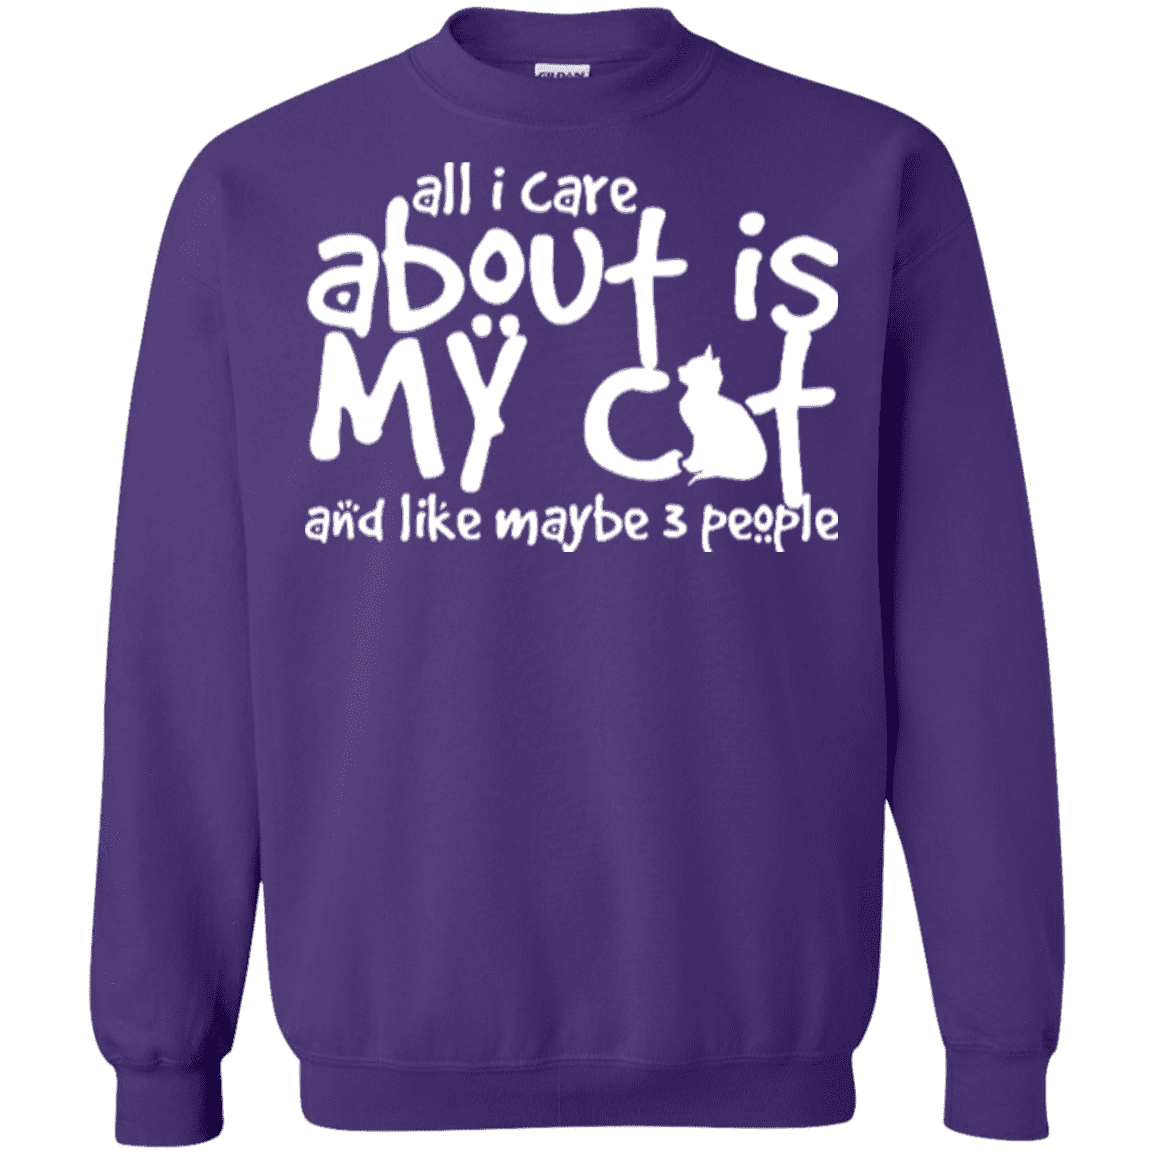 All I Care About Is My Cat - Sweatshirt.